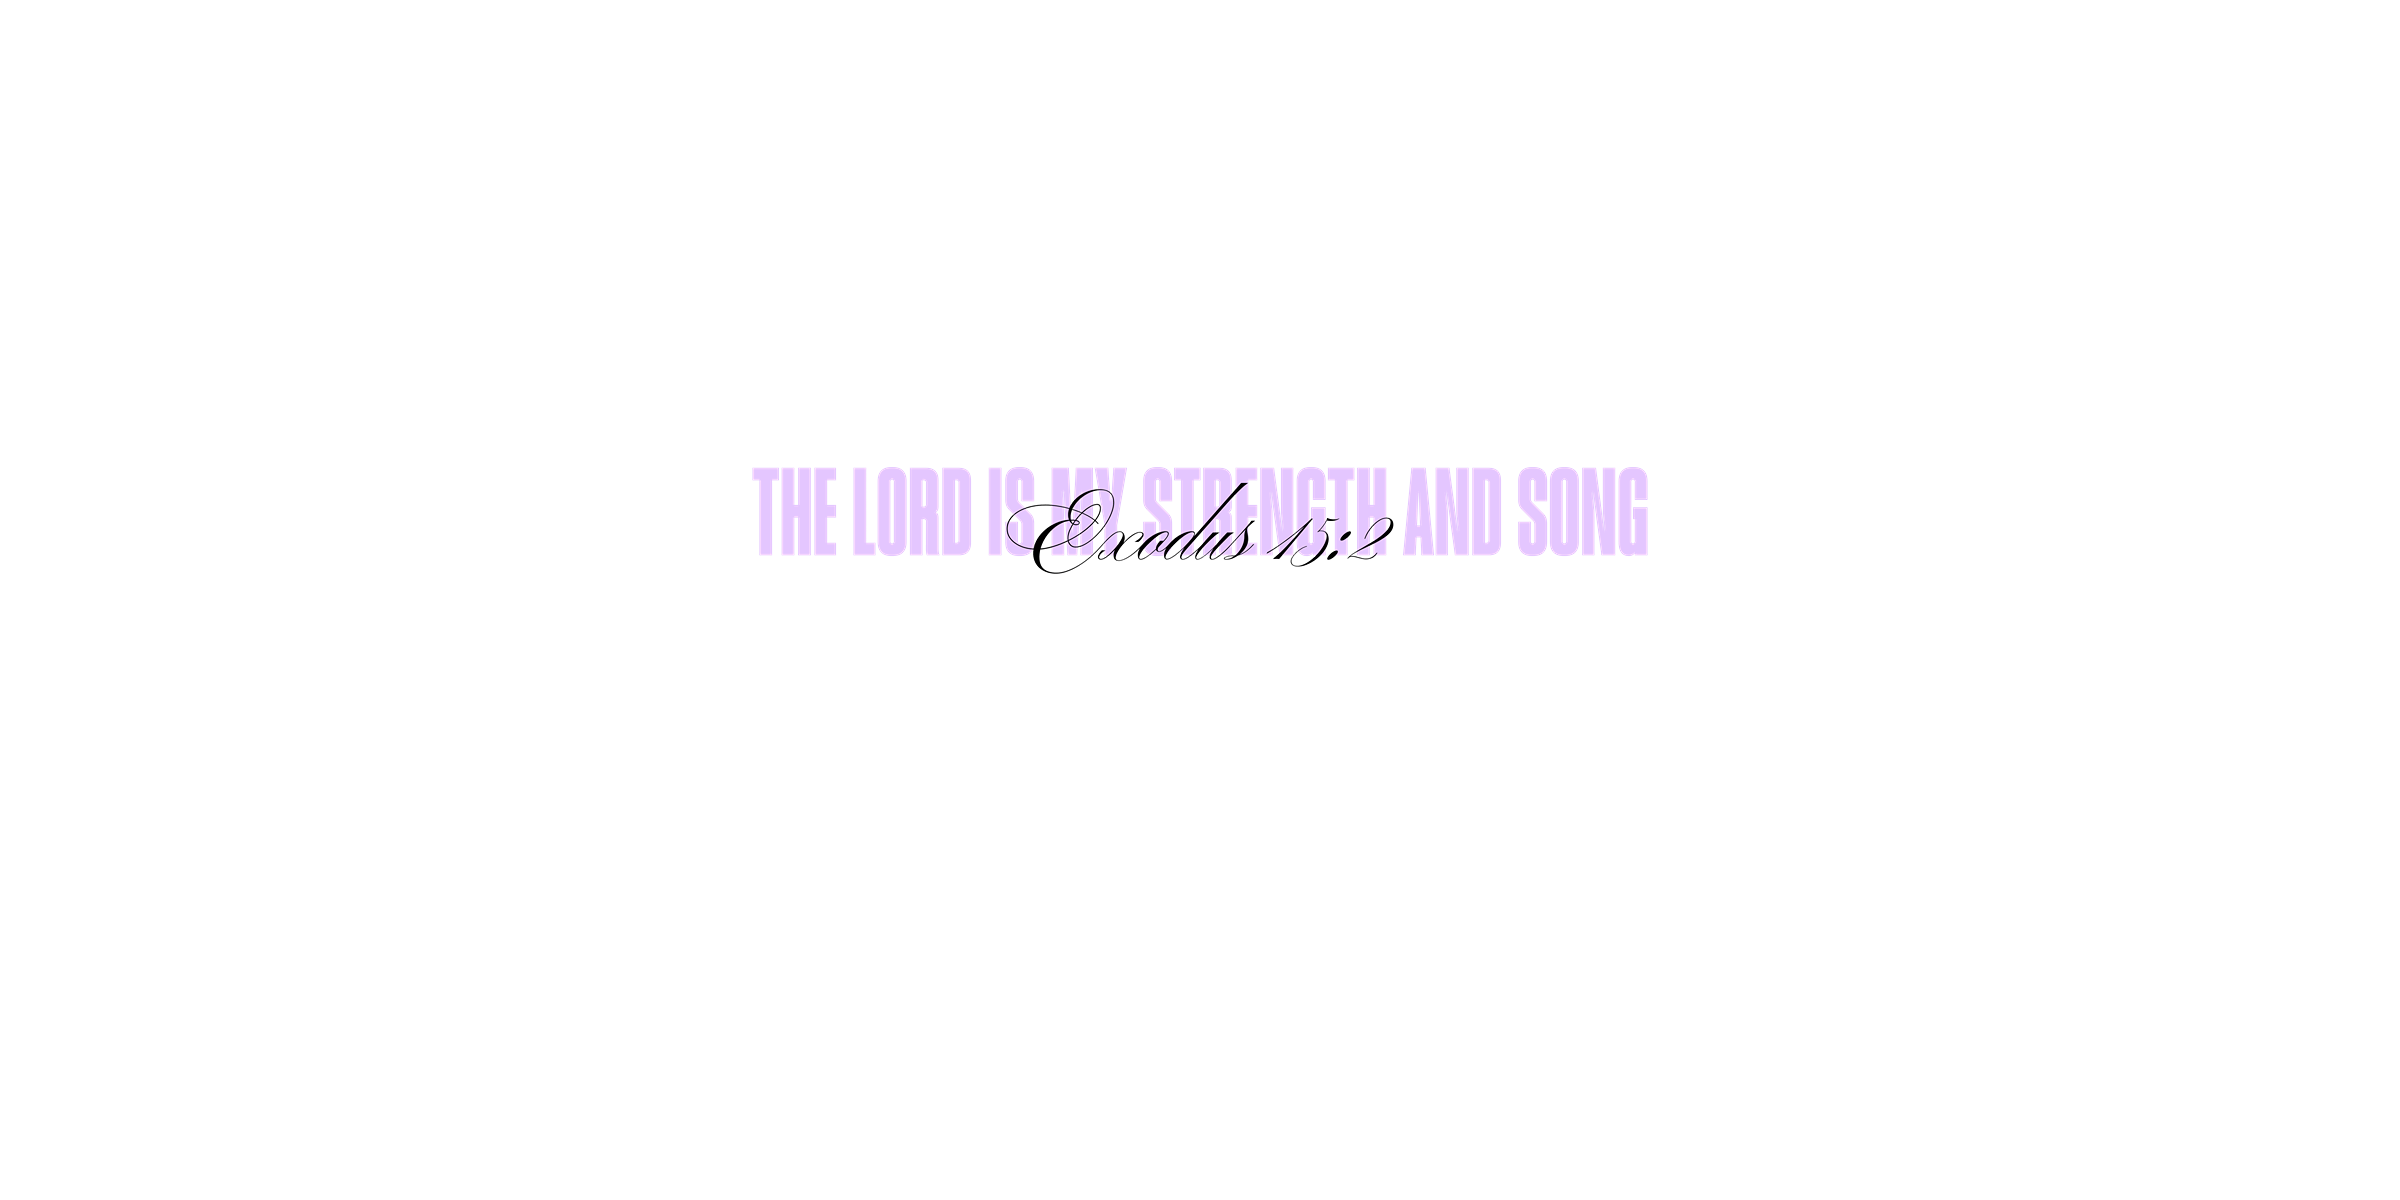 Exodus 15:2 - The LORD is my strength and song